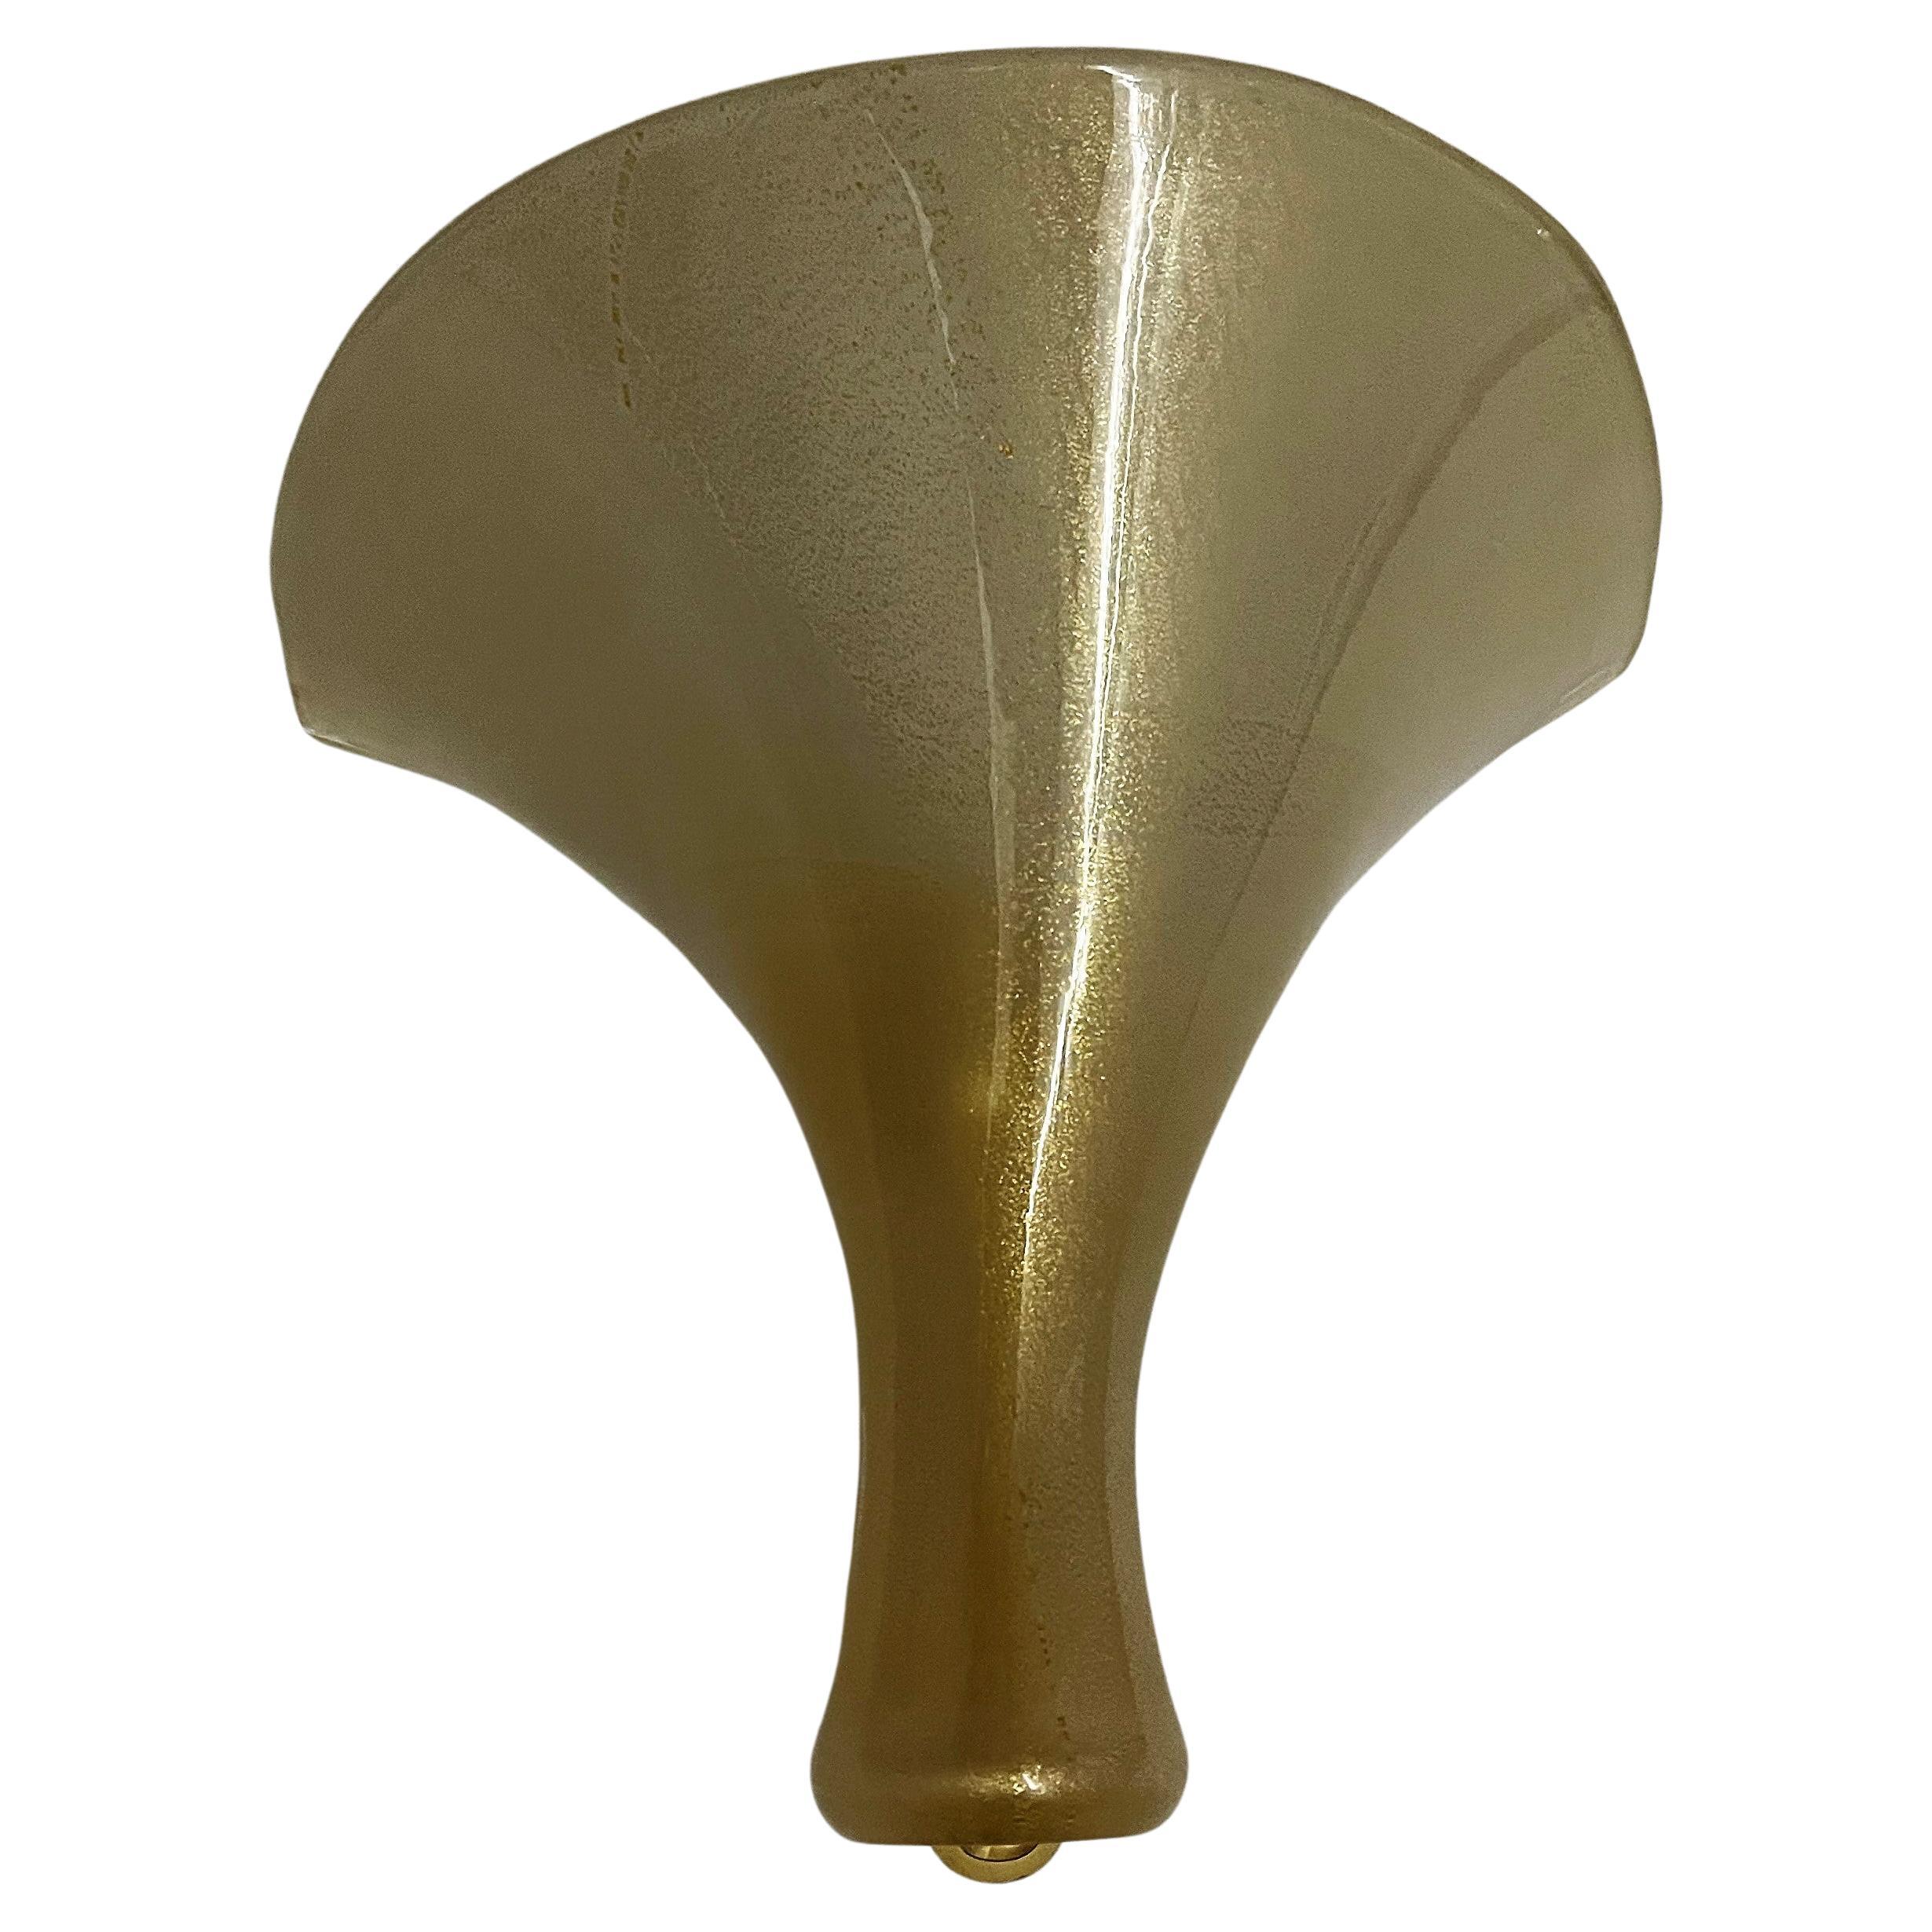 3 Mid Century Modern Sconce by Venini, "Trine" model, Italy circa 1970 For Sale